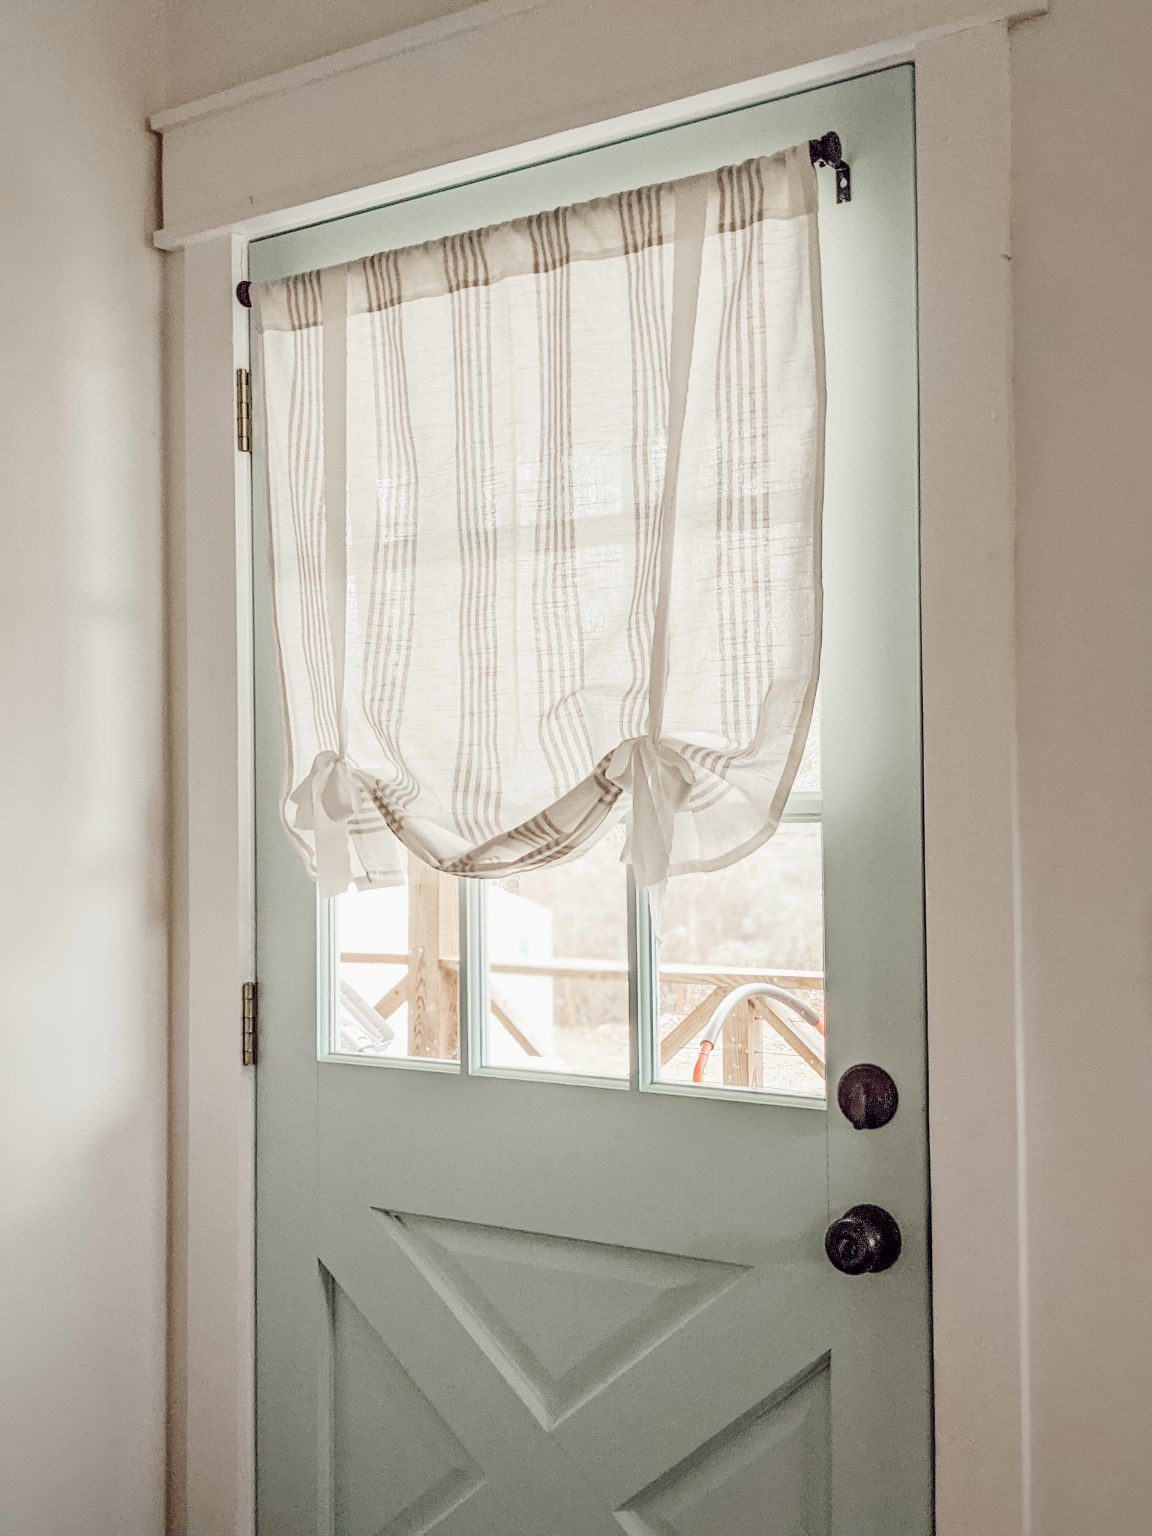 Welcome Home: Door Curtains That Make a Statement